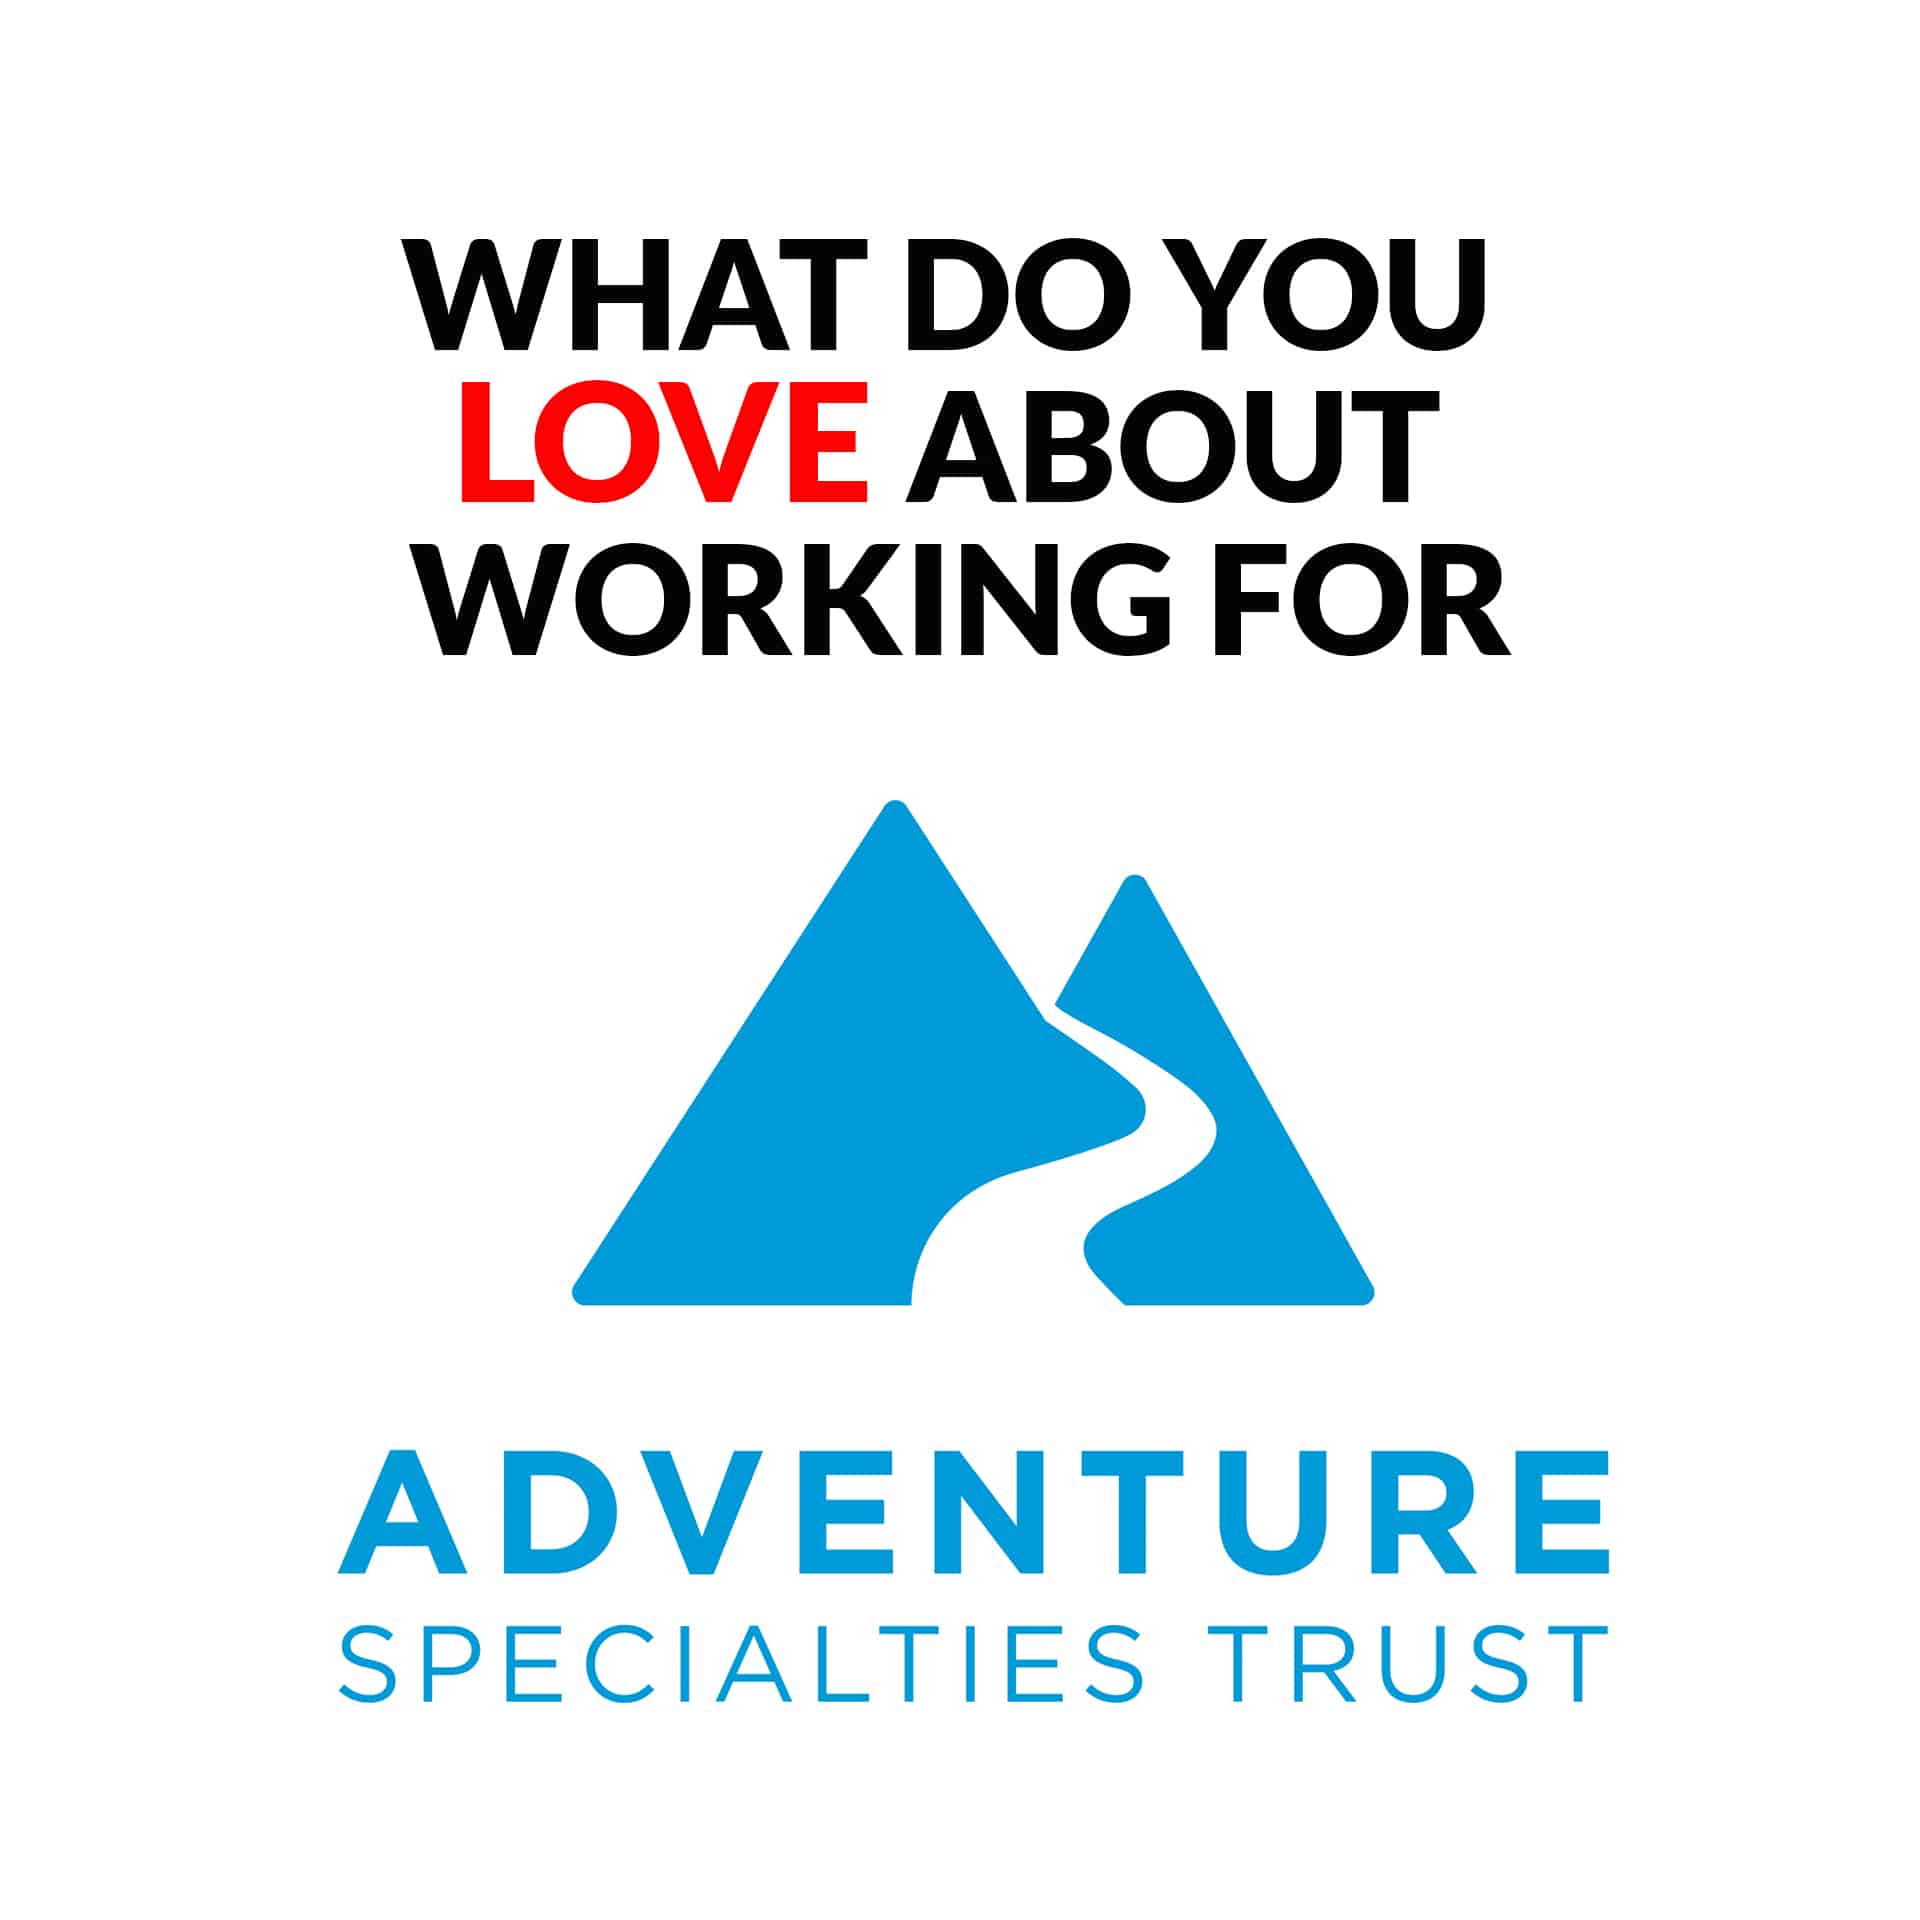 What do you LOVE about working for Adventure Specialties Trust?